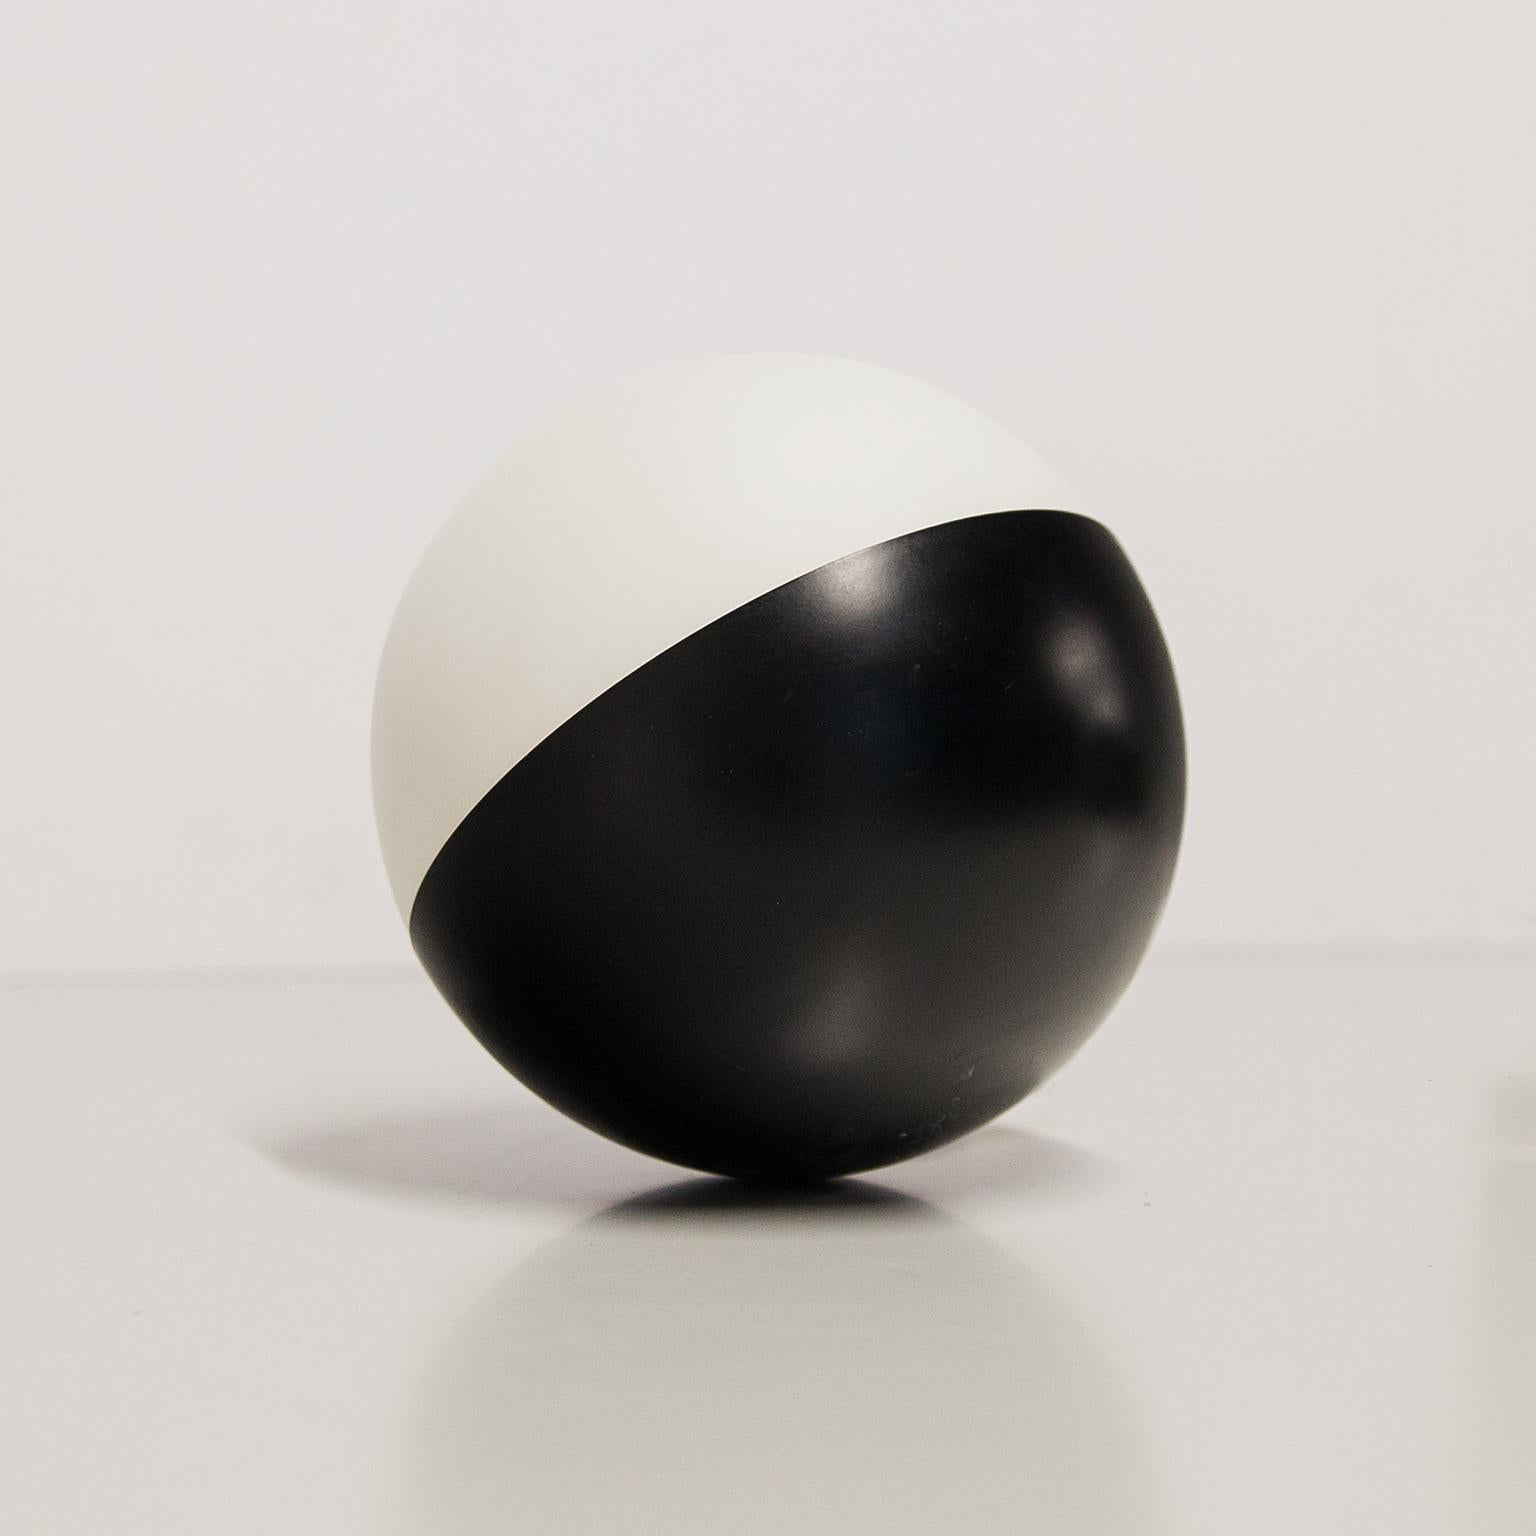 Ball lamp designed in painted black and milk glass with the original Stilnovo sticker made in Italy, 1960s.
